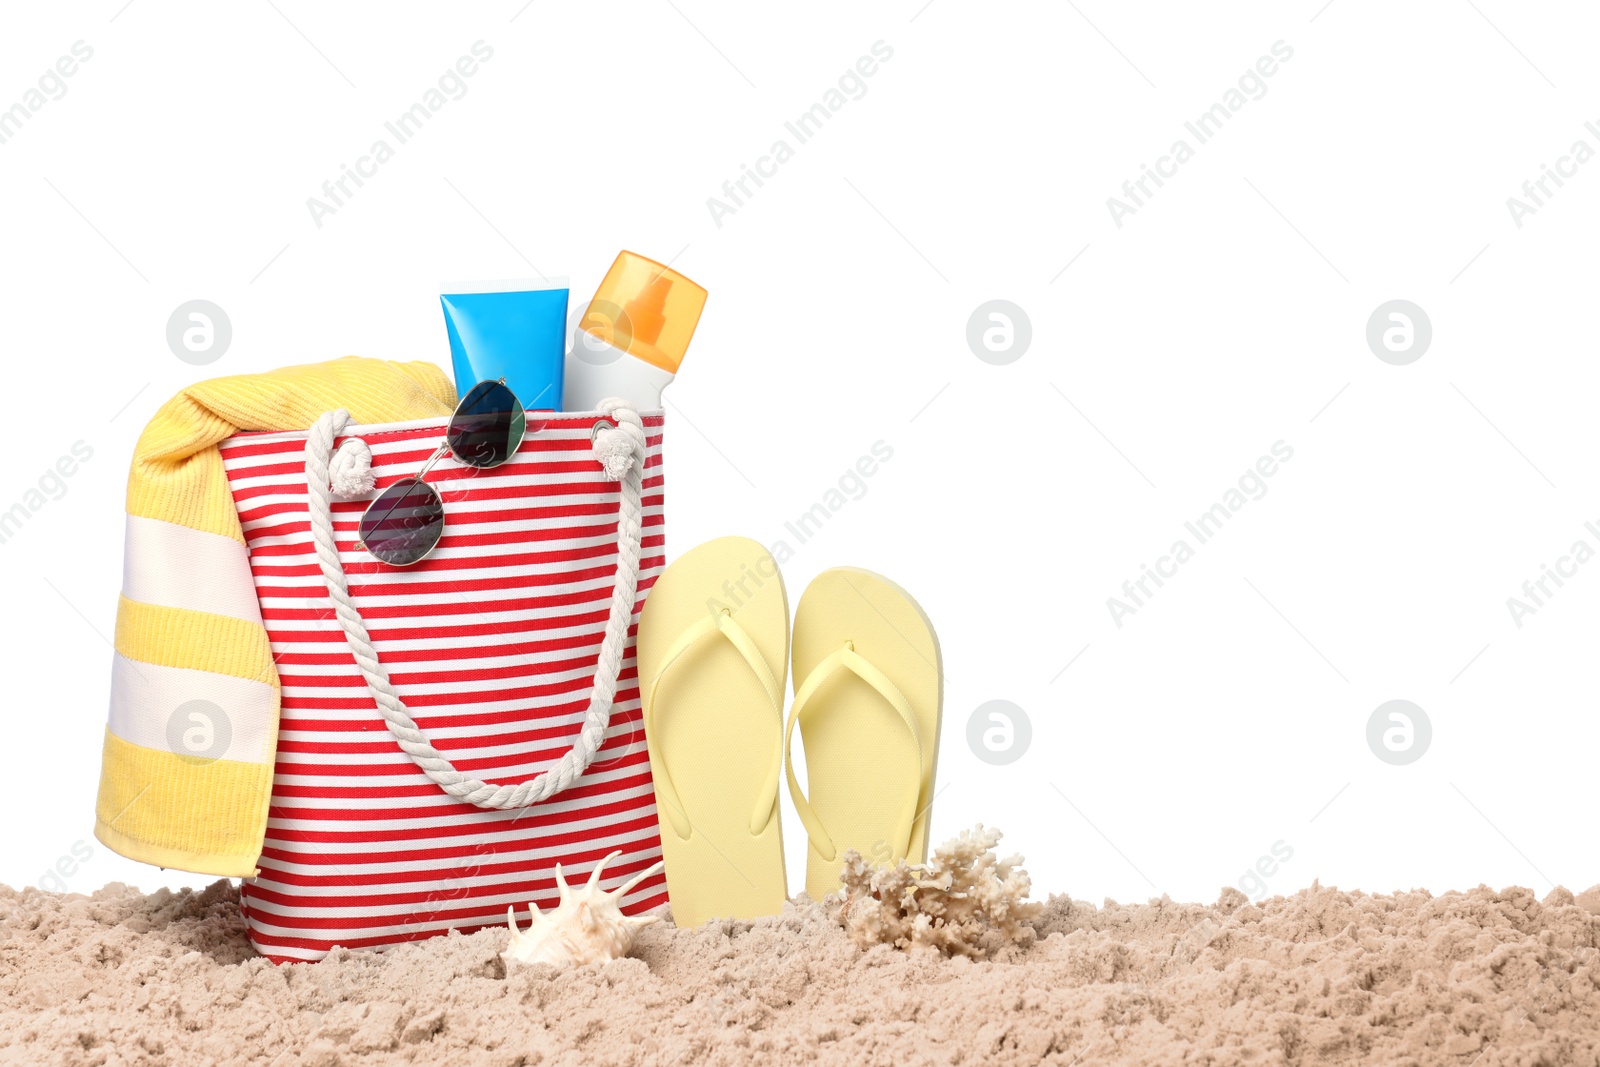 Photo of Stylish bag with beach accessories on sand against white background